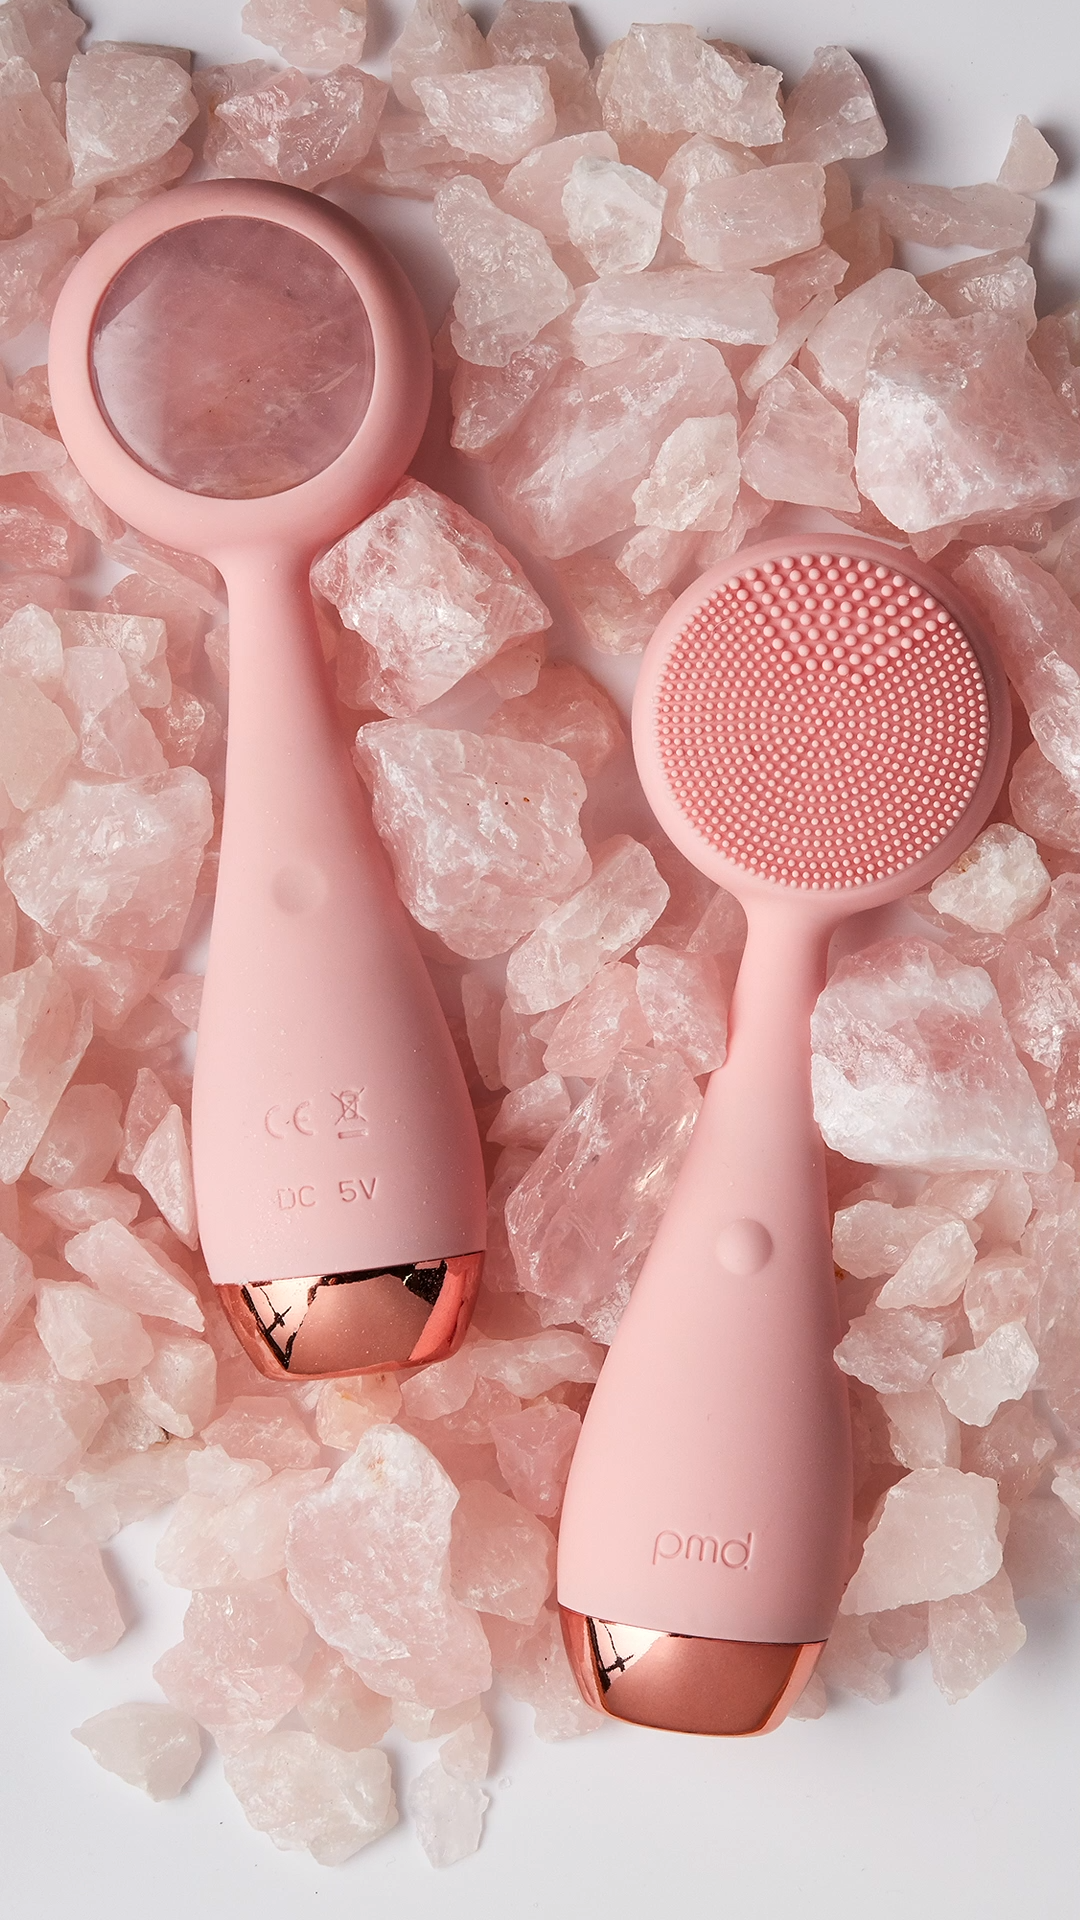 Rose Quartz Facial with the PMD Clean Pro RQ - Rose Quartz Facial with the PMD Clean Pro RQ -   18 beauty Spa pictures ideas